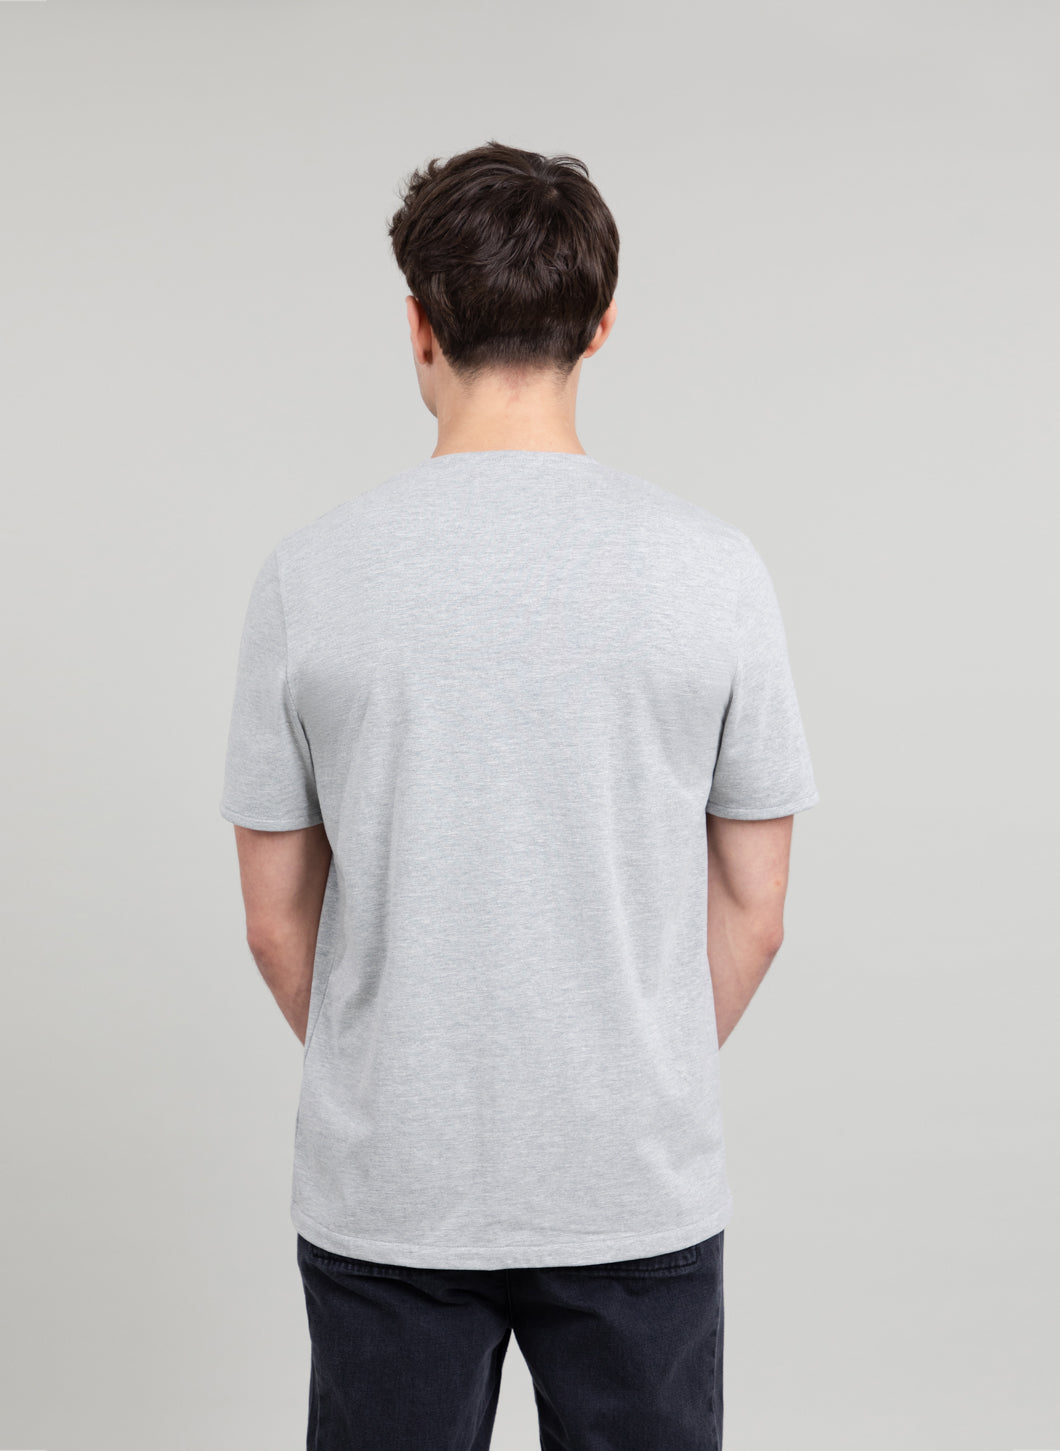 T-Shirt with 5 Buttons in Heather Grey Cotton